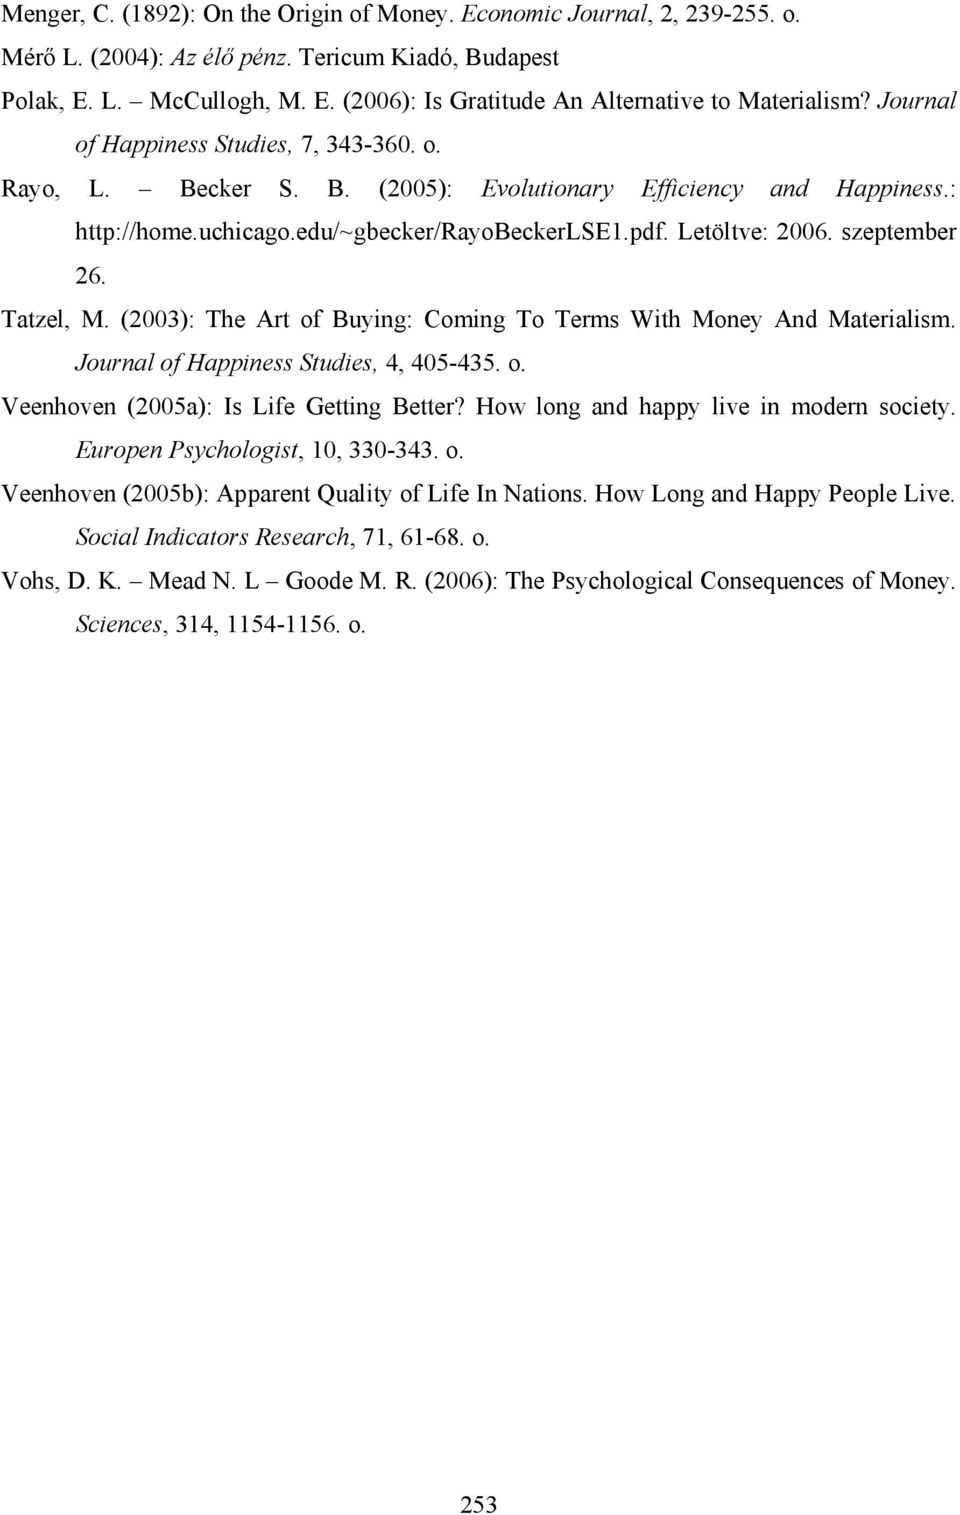 Tatzel, M. (2003): The Art of Buying: Coming To Terms With Money And Materialism. Journal of Happiness Studies, 4, 405-435. o. Veenhoven (2005a): Is Life Getting Better?